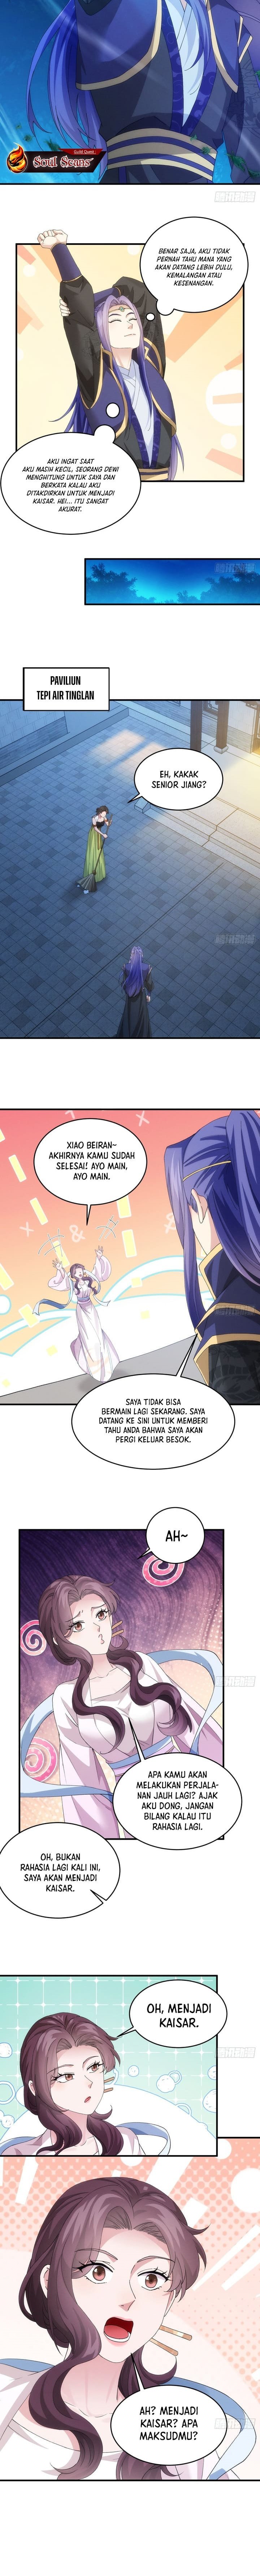 Dilarang COPAS - situs resmi www.mangacanblog.com - Komik i just dont play the card according to the routine 150 - chapter 150 151 Indonesia i just dont play the card according to the routine 150 - chapter 150 Terbaru 6|Baca Manga Komik Indonesia|Mangacan